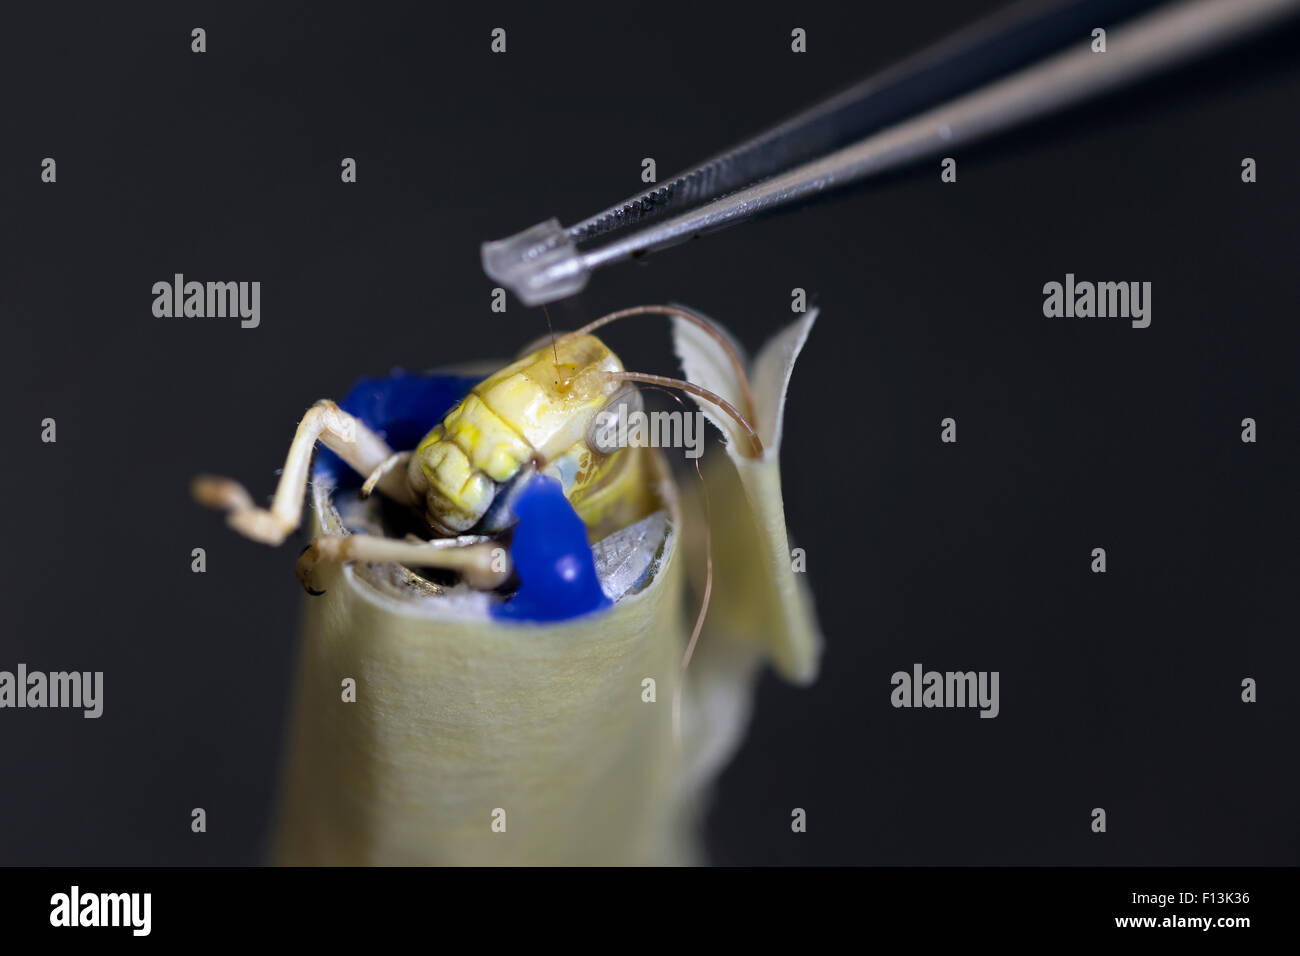 Scientists implanting wires in the brain of a  Desert locust (Schistocerca gregaria) to measure brain activity. University of Marburg, Germany. November 2013. Stock Photo